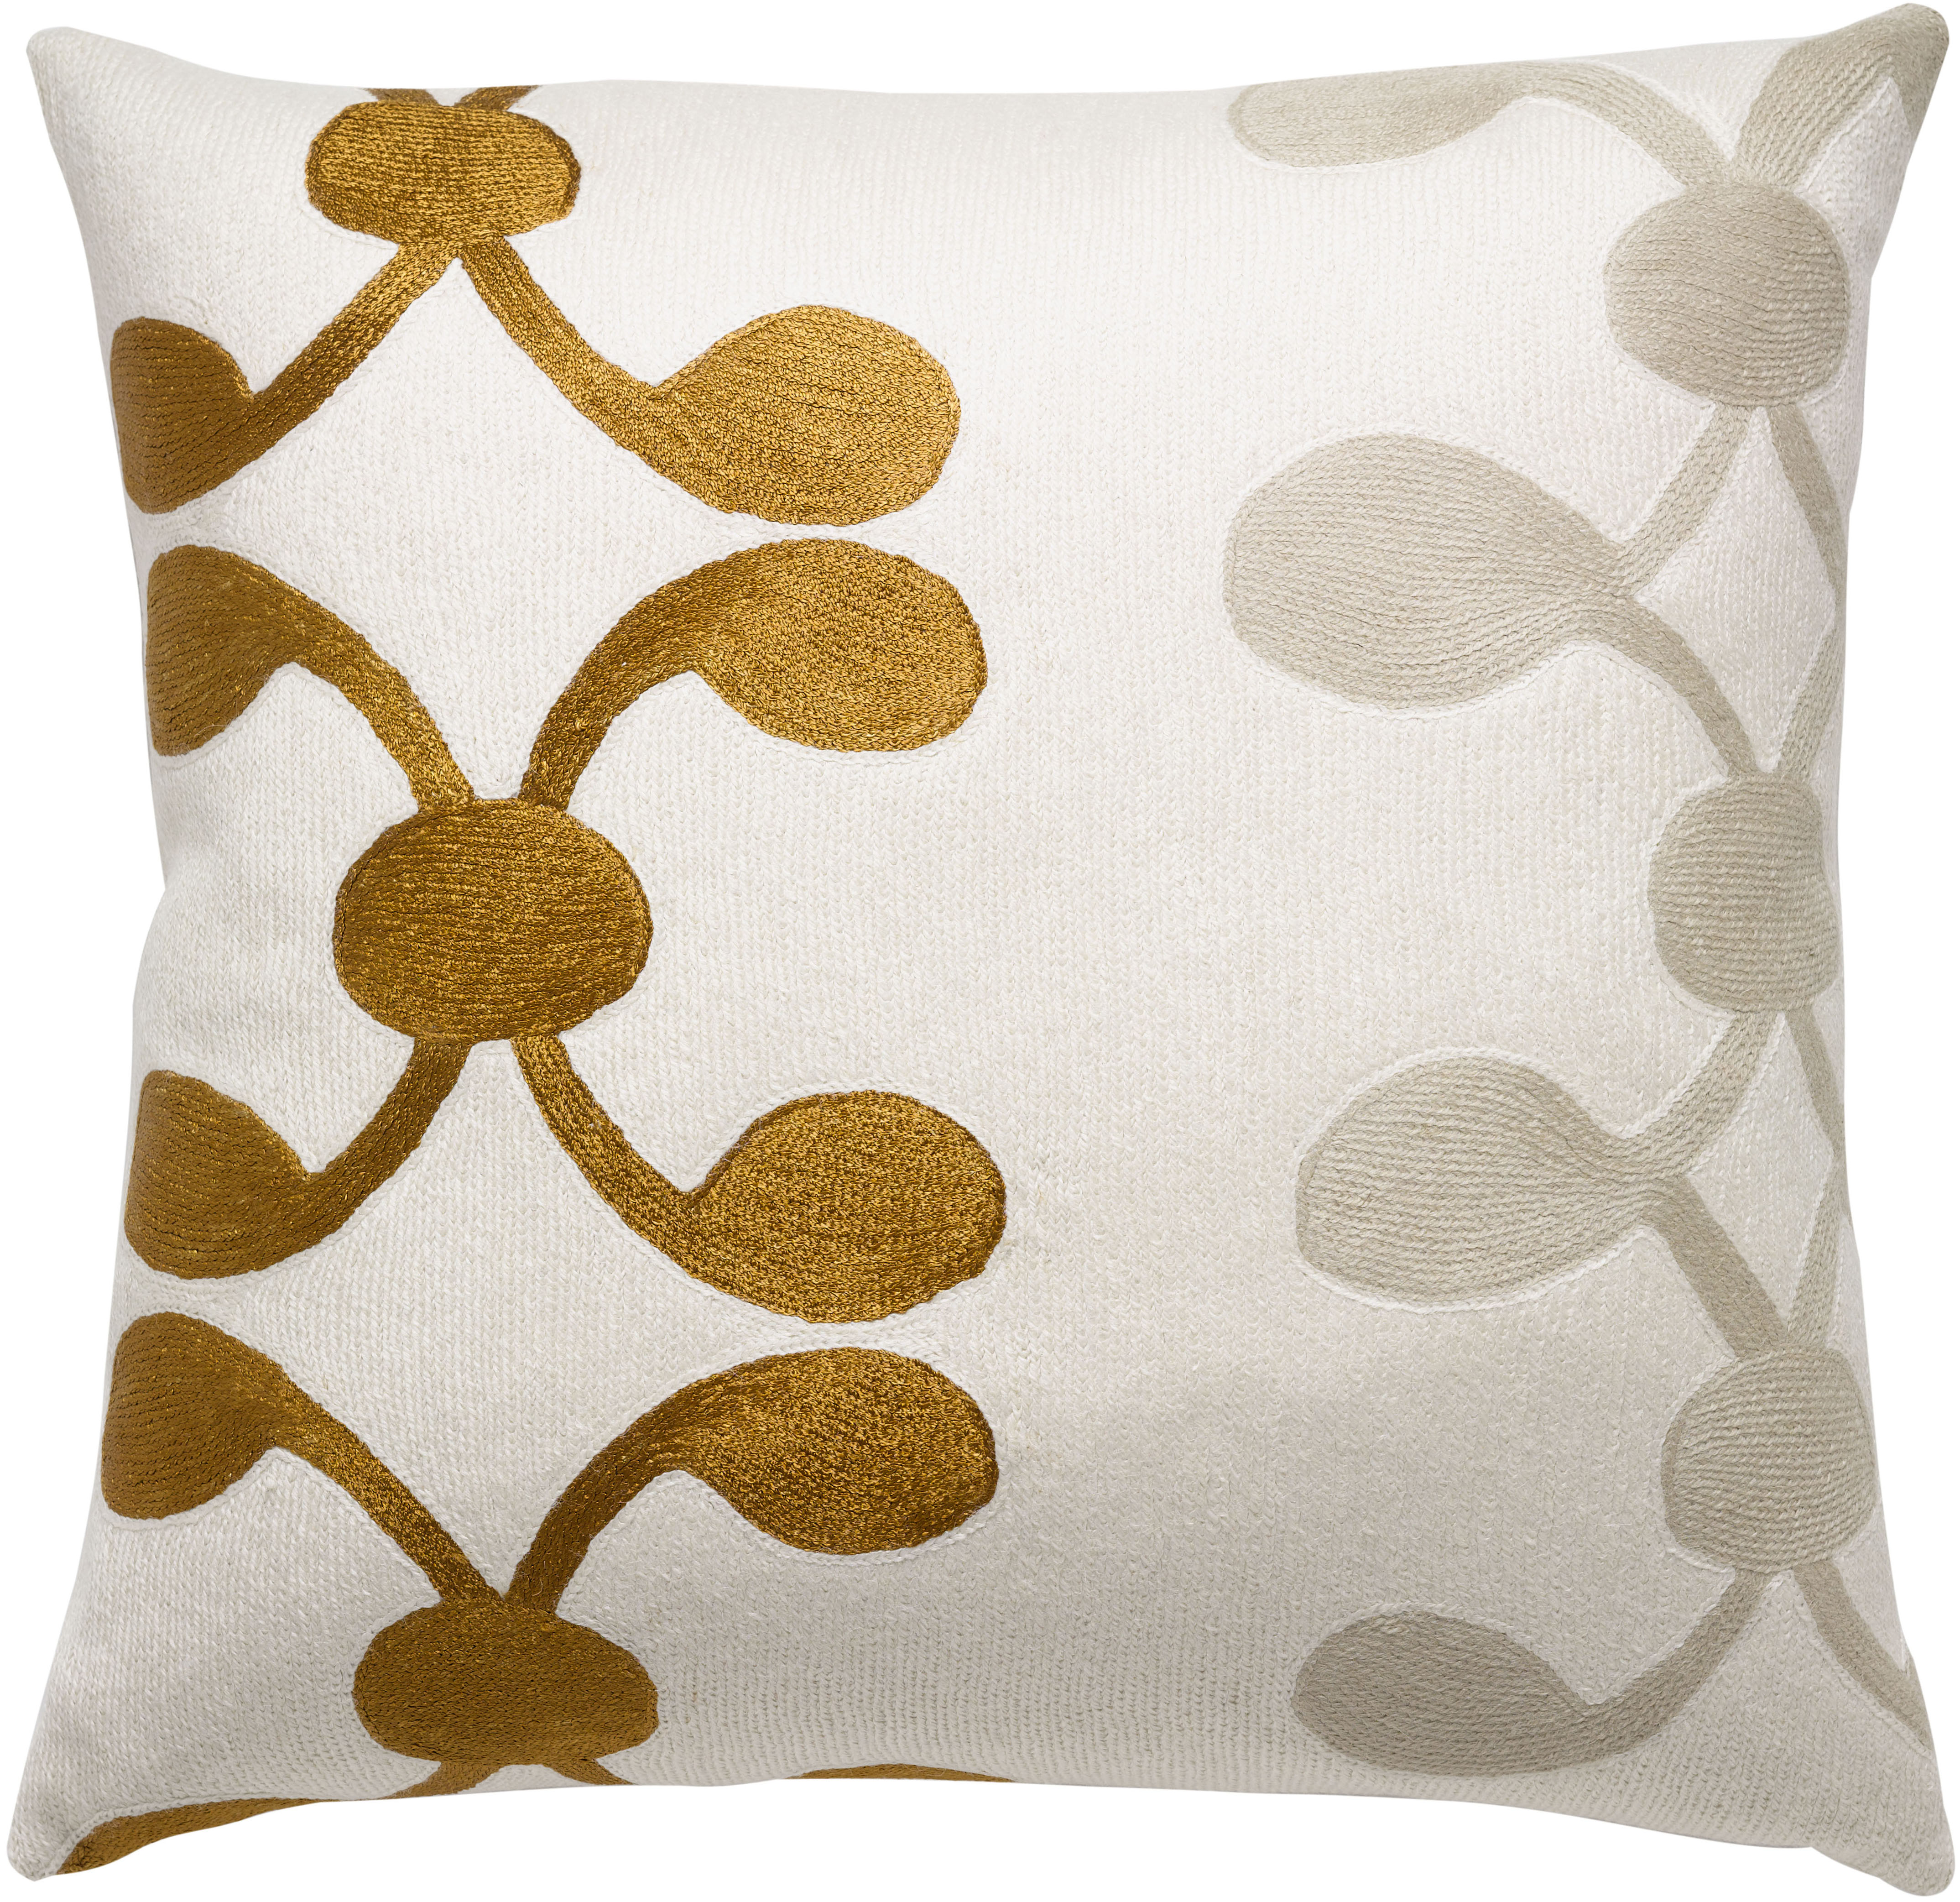 Pillows: Chain :: :: Textiles Judy Ross Hand-Embroidered Stitch Celine 18x18